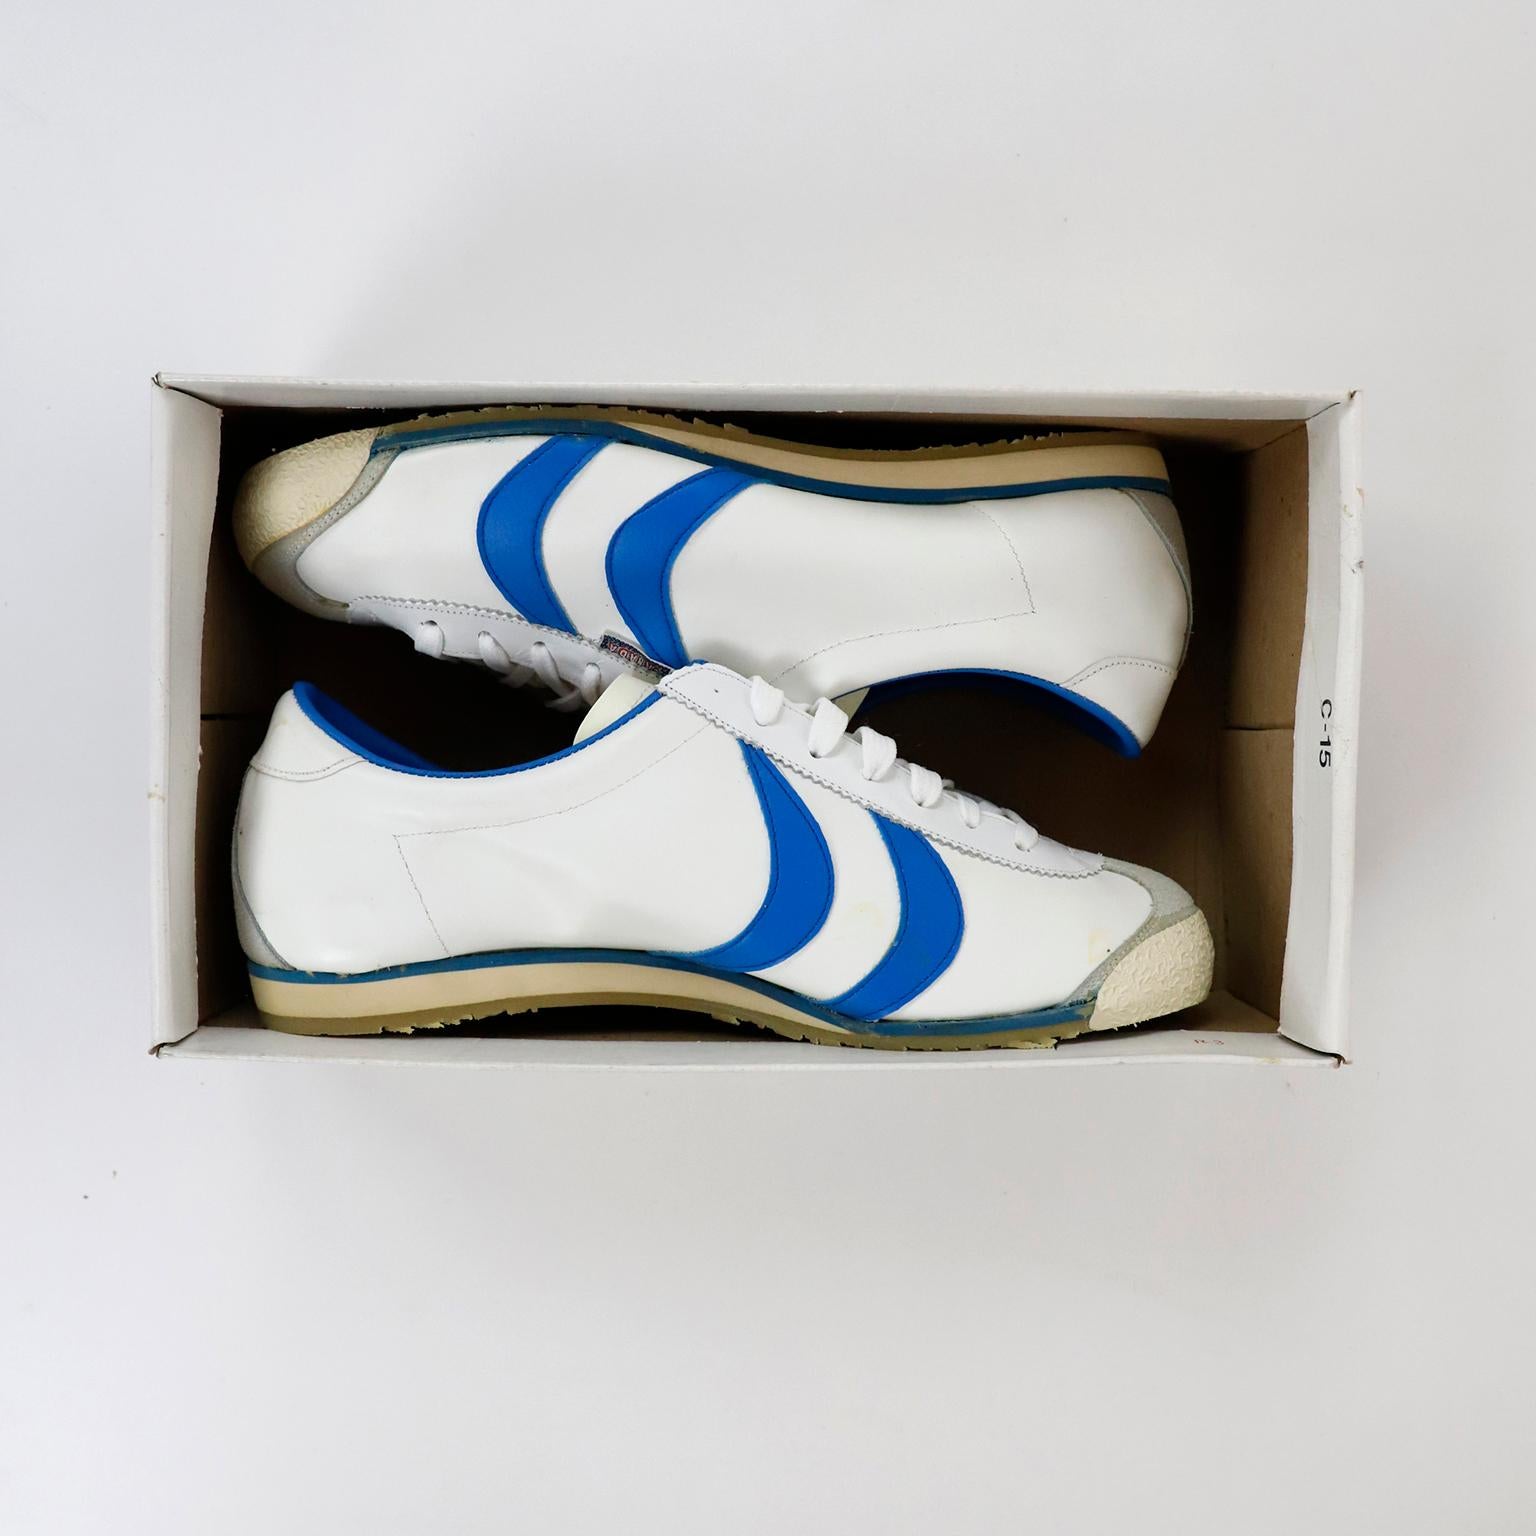 We offer this unique pair of never used CANADA sneakers with original box. circa 1970.
About CANADA:
CANADA was a very successful Mexican shoes and sneakers brand, during the 70s and 80s.
In the book Shoe Dog, in which Phil Knight, the legendary